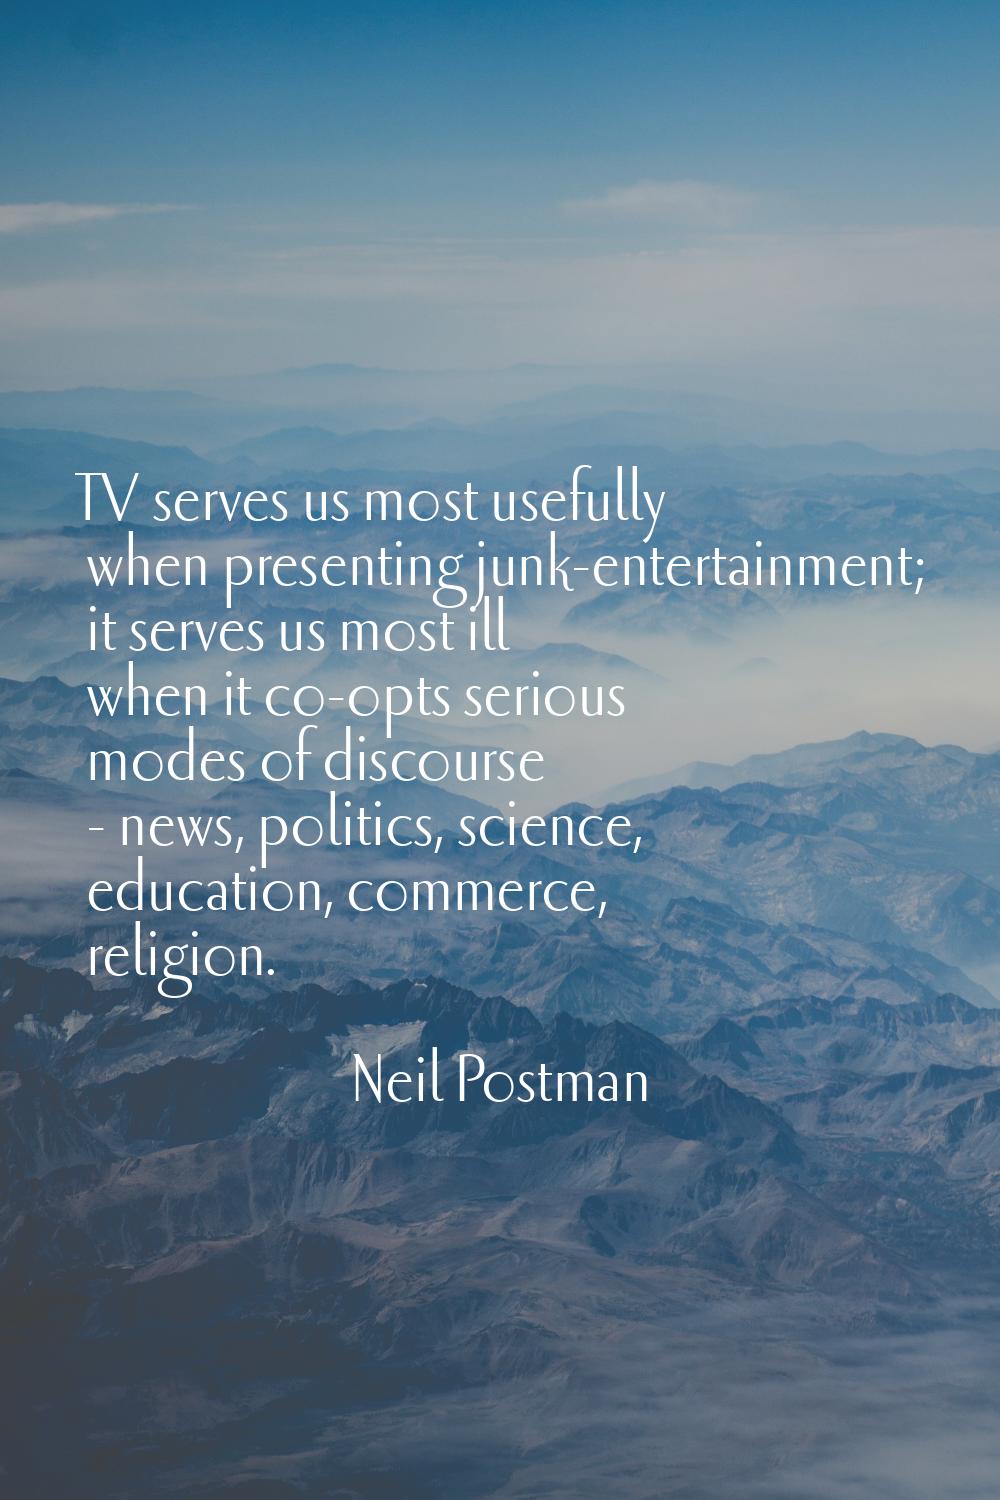 TV serves us most usefully when presenting junk-entertainment; it serves us most ill when it co-opt